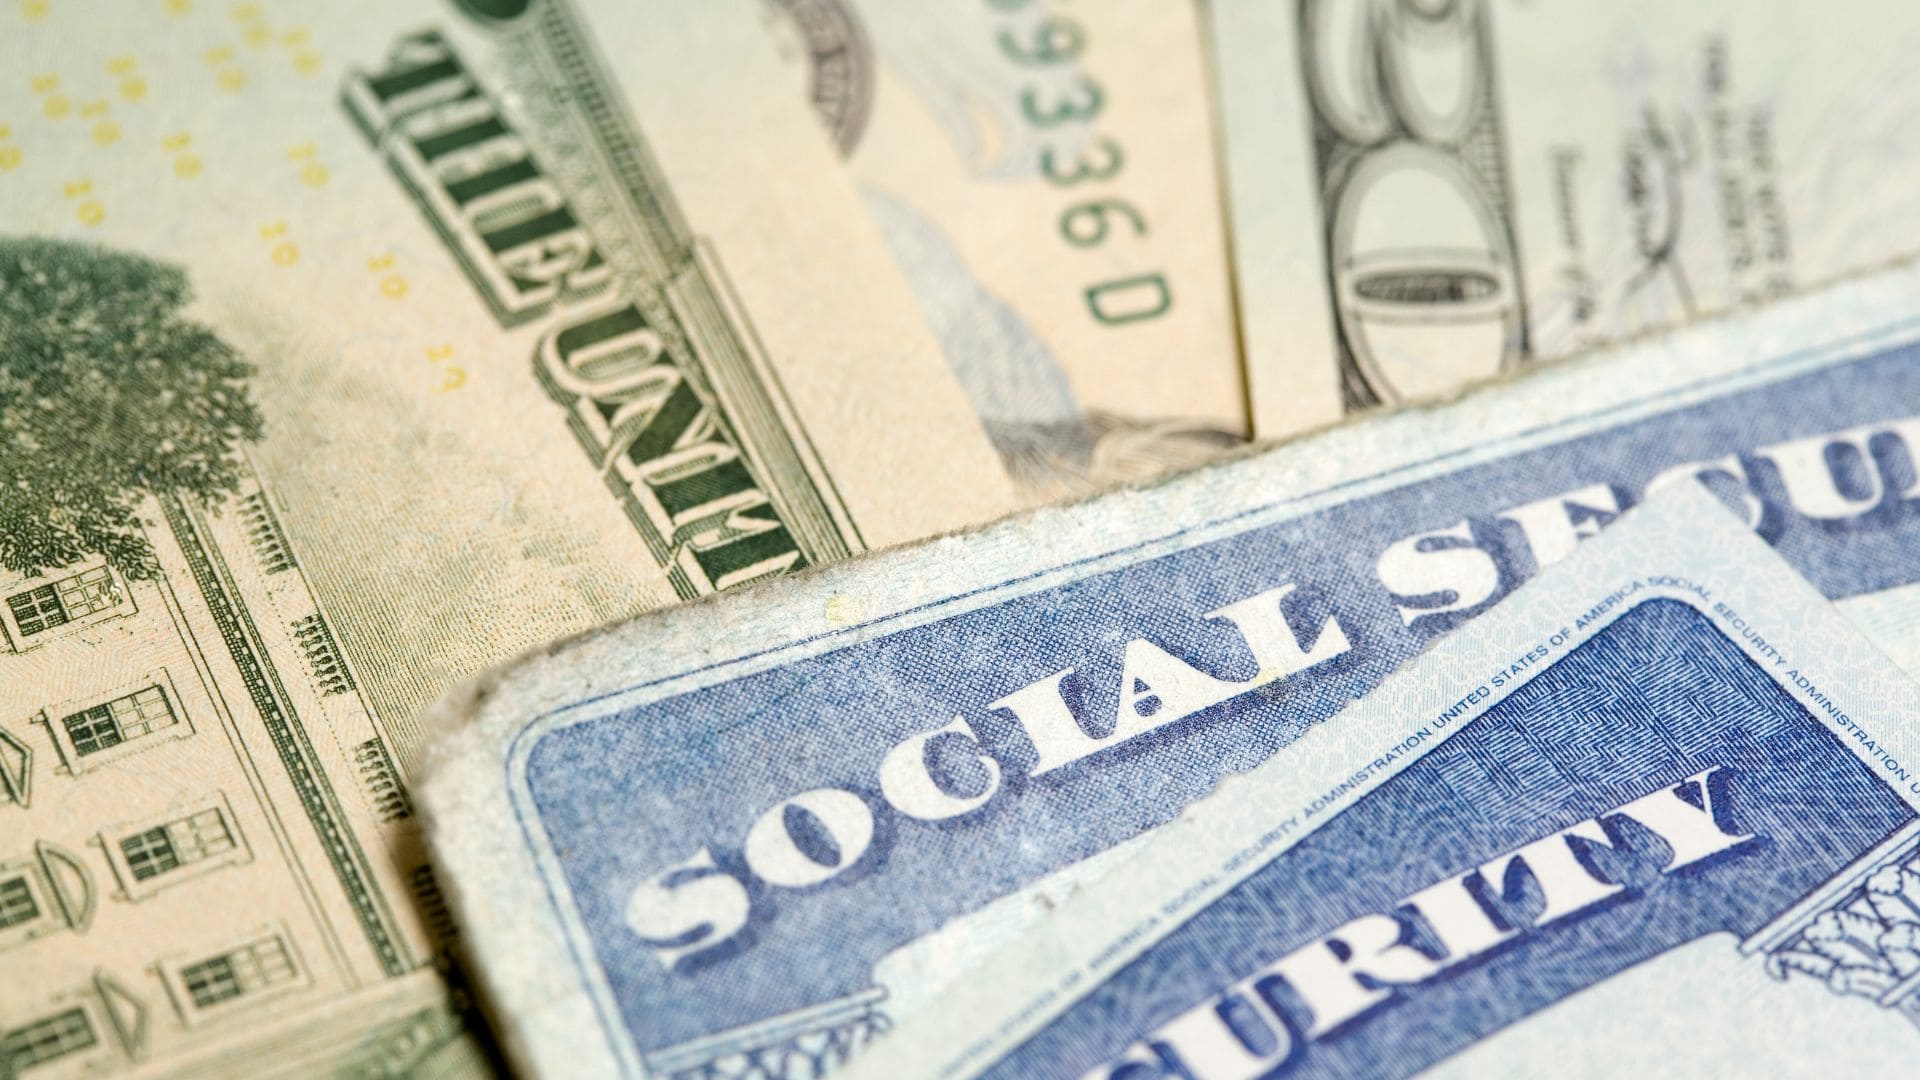 Senior retirees in this group will get a new Social Security check soon